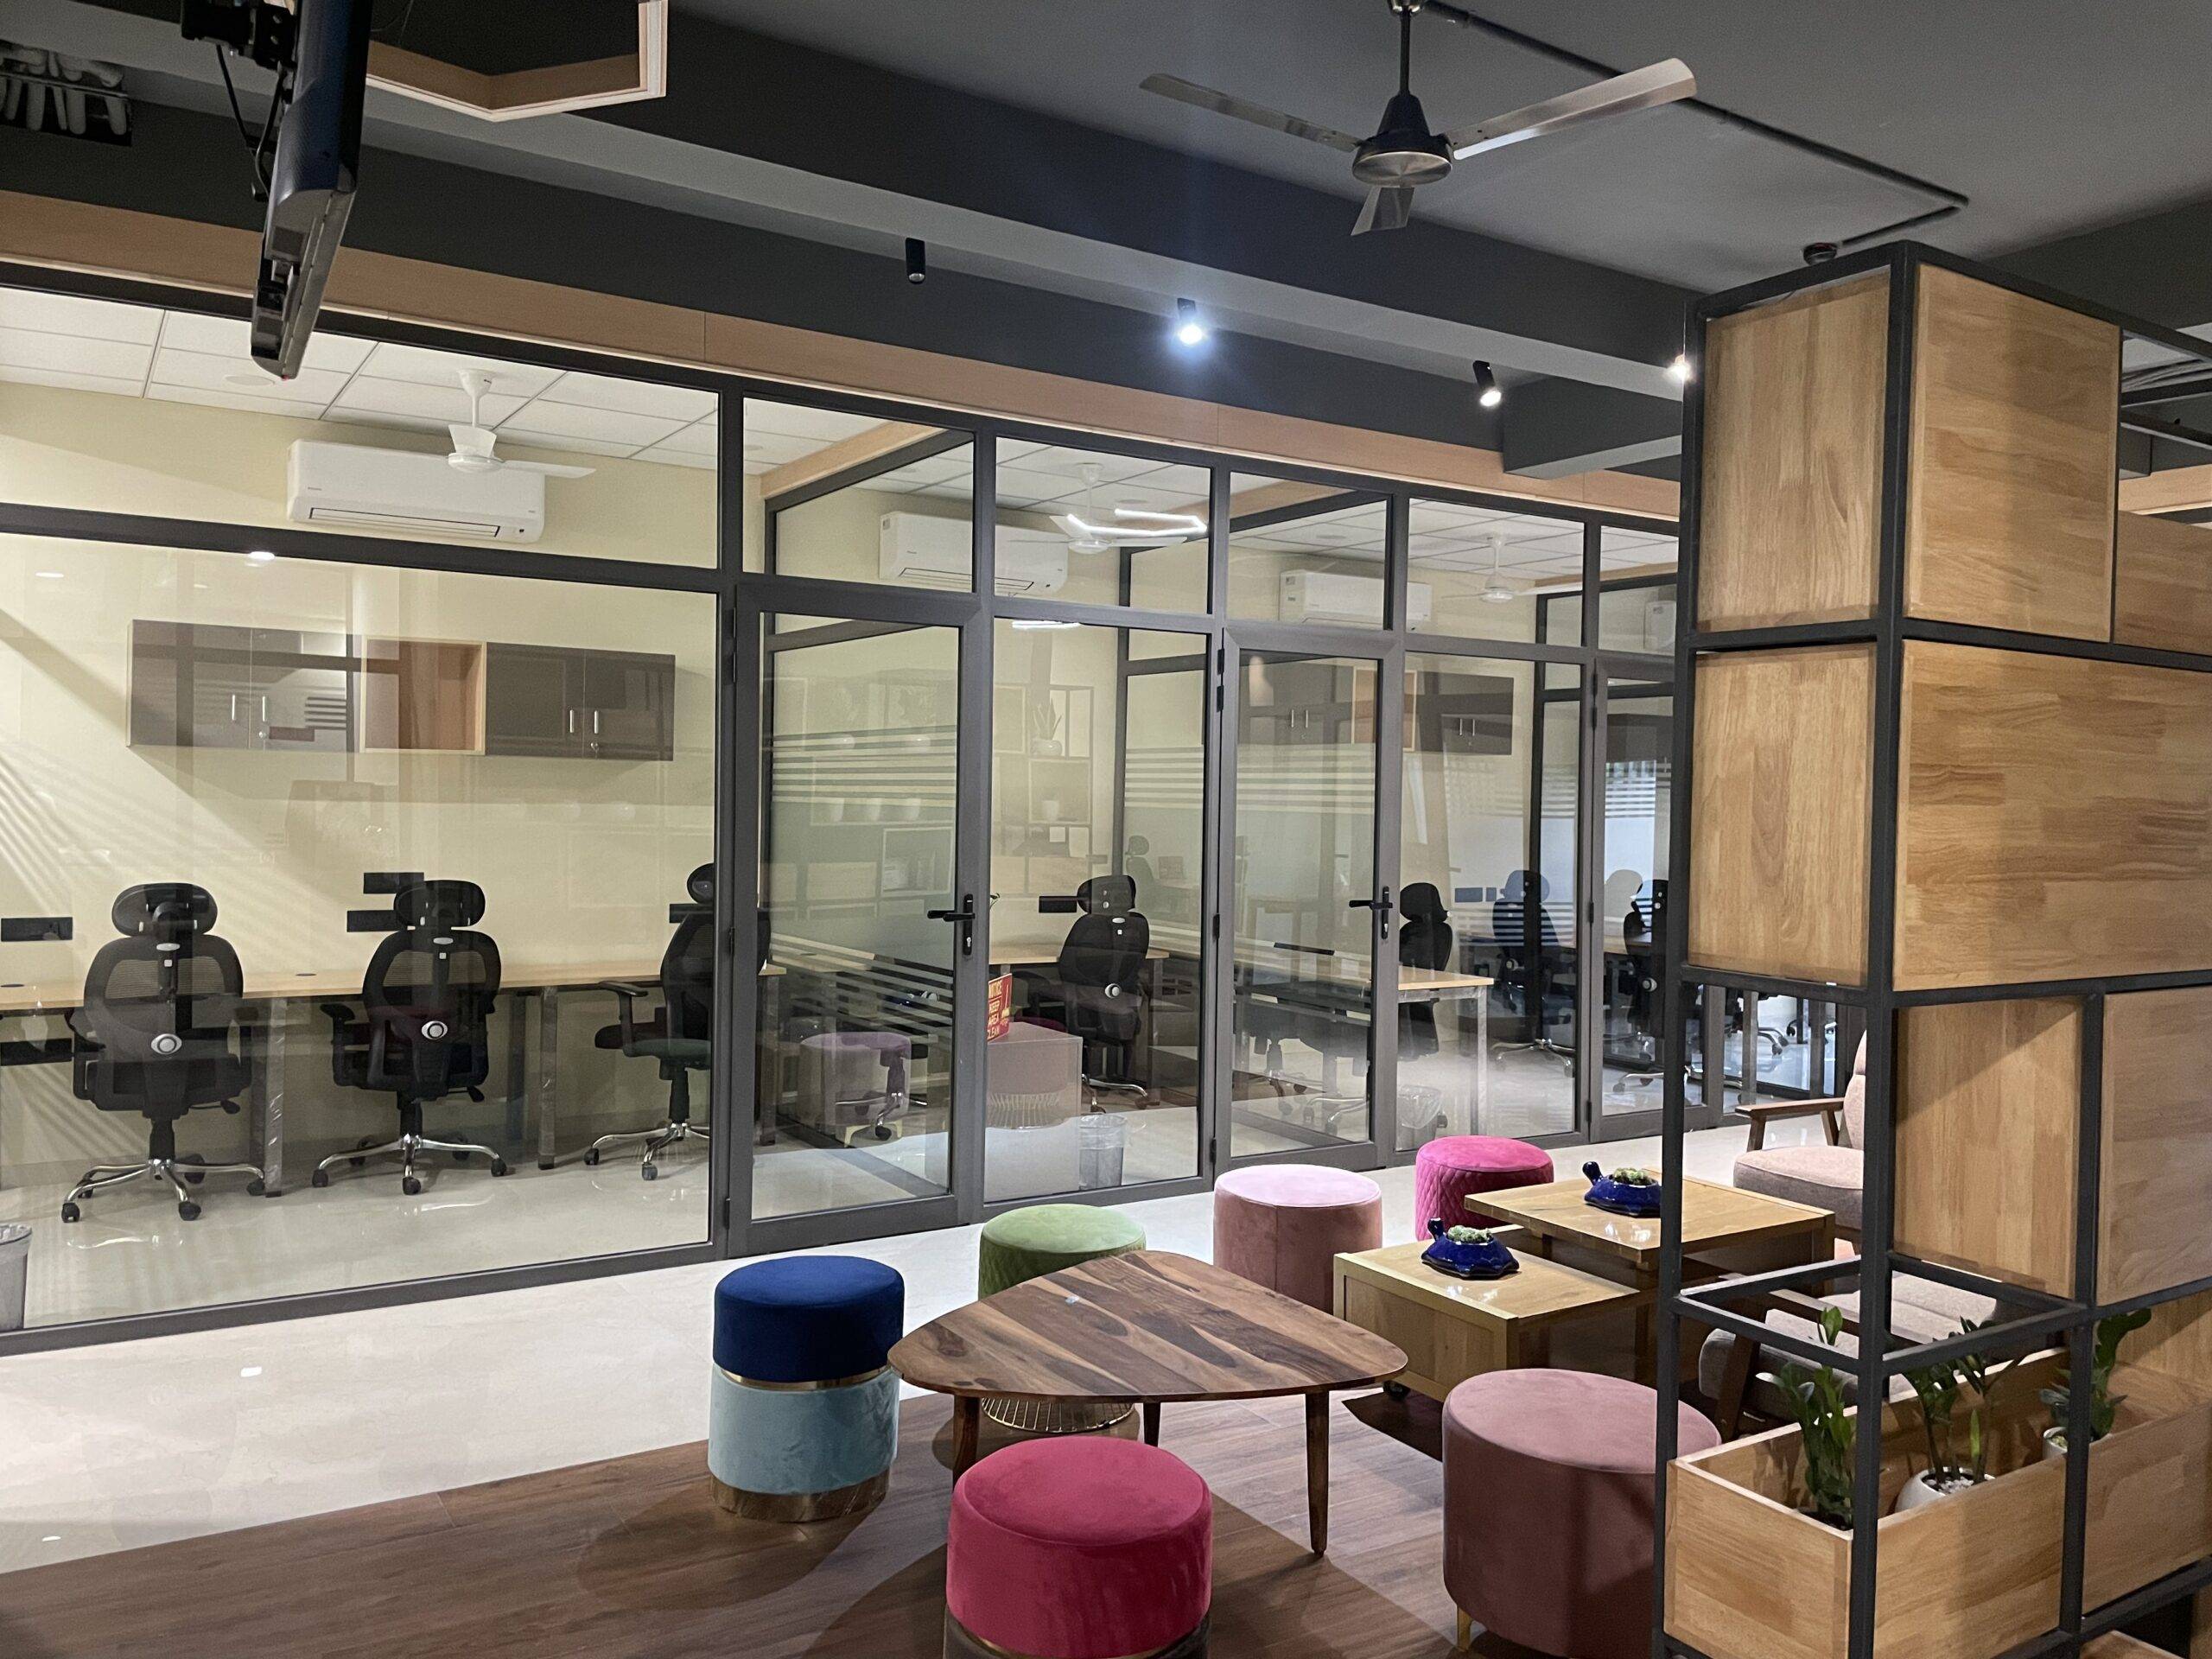 7 reasons to opt for co-working spaces in 2022